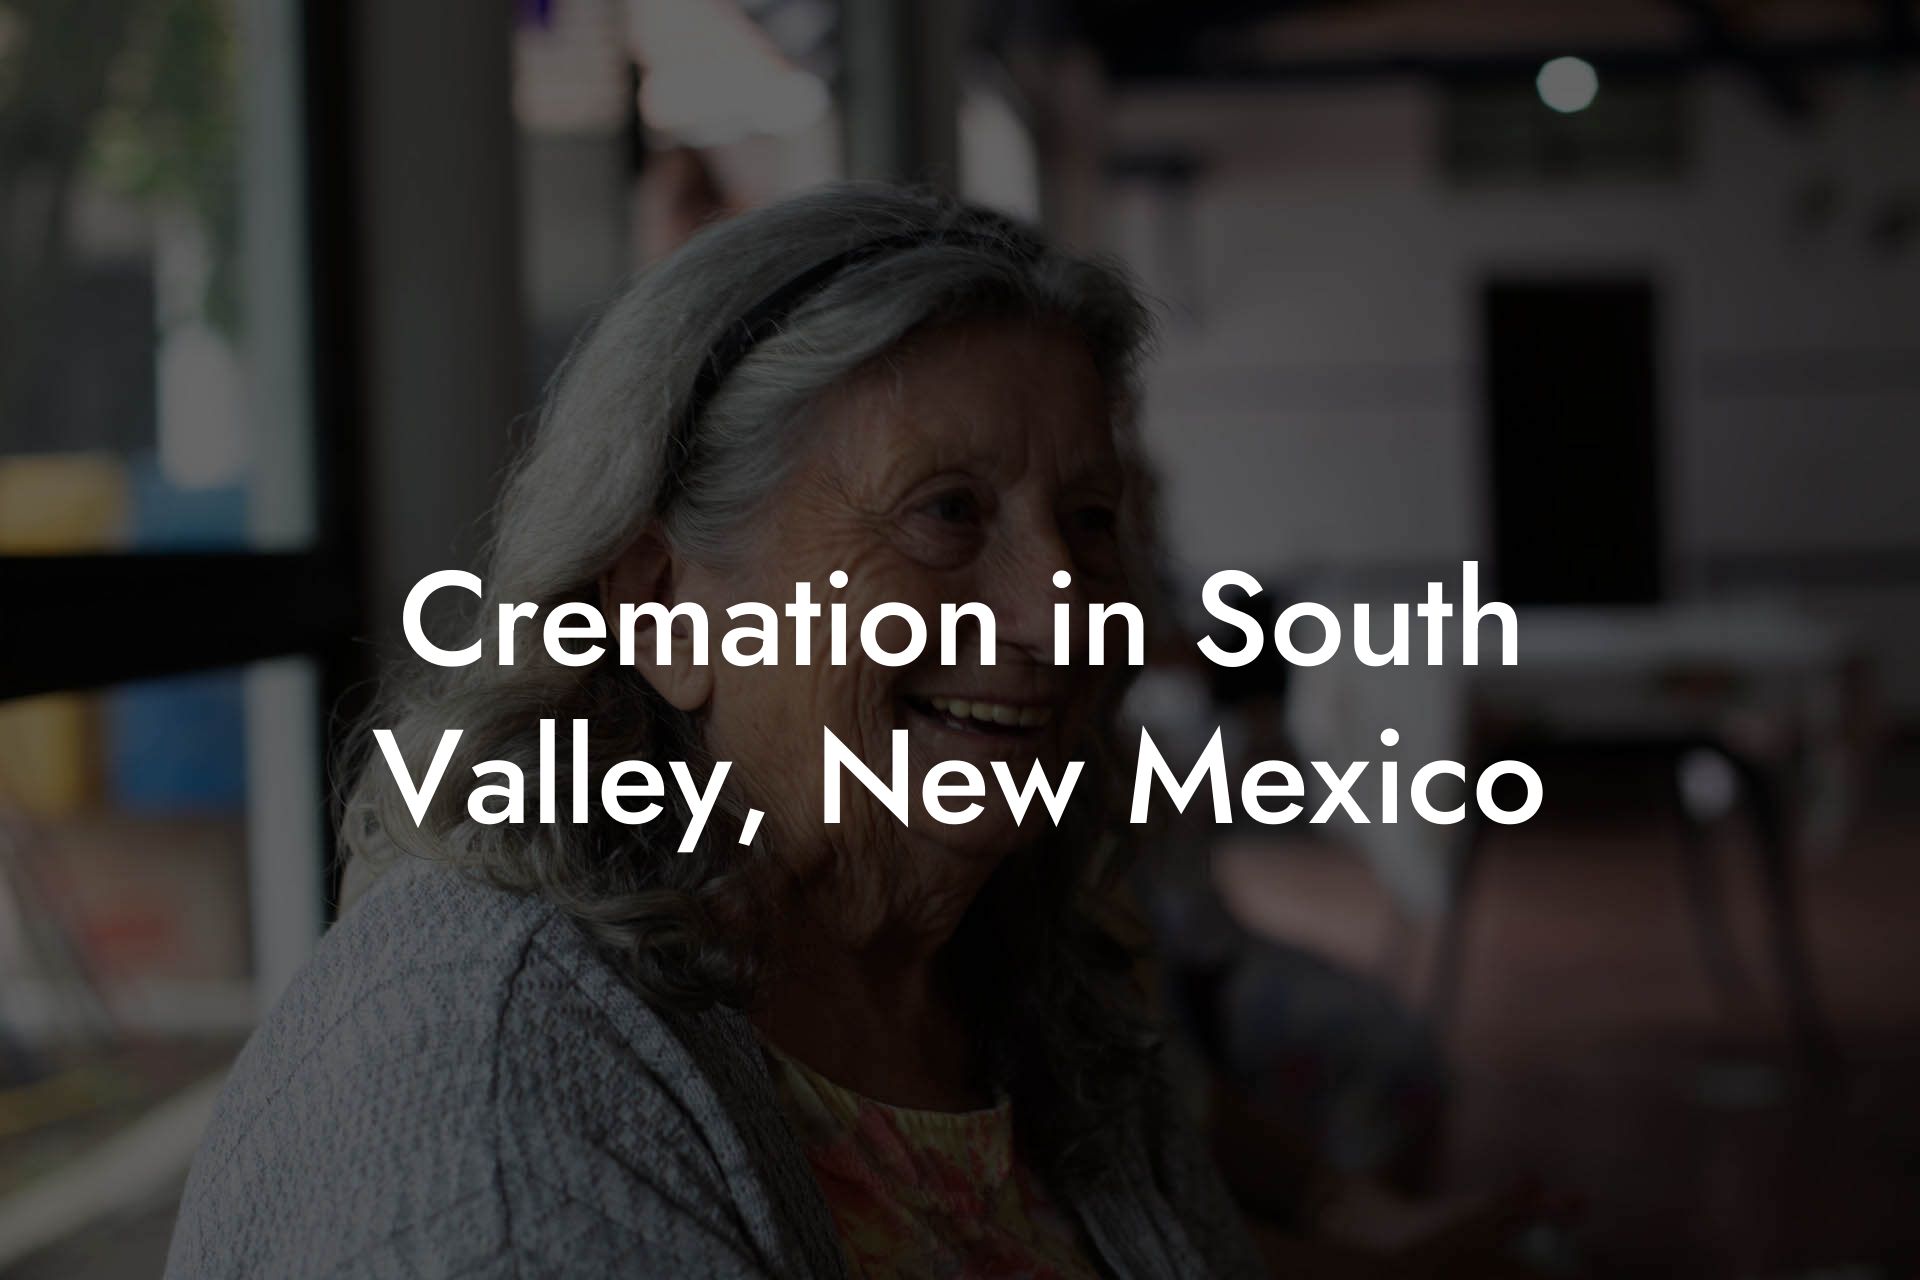 Cremation in South Valley, New Mexico